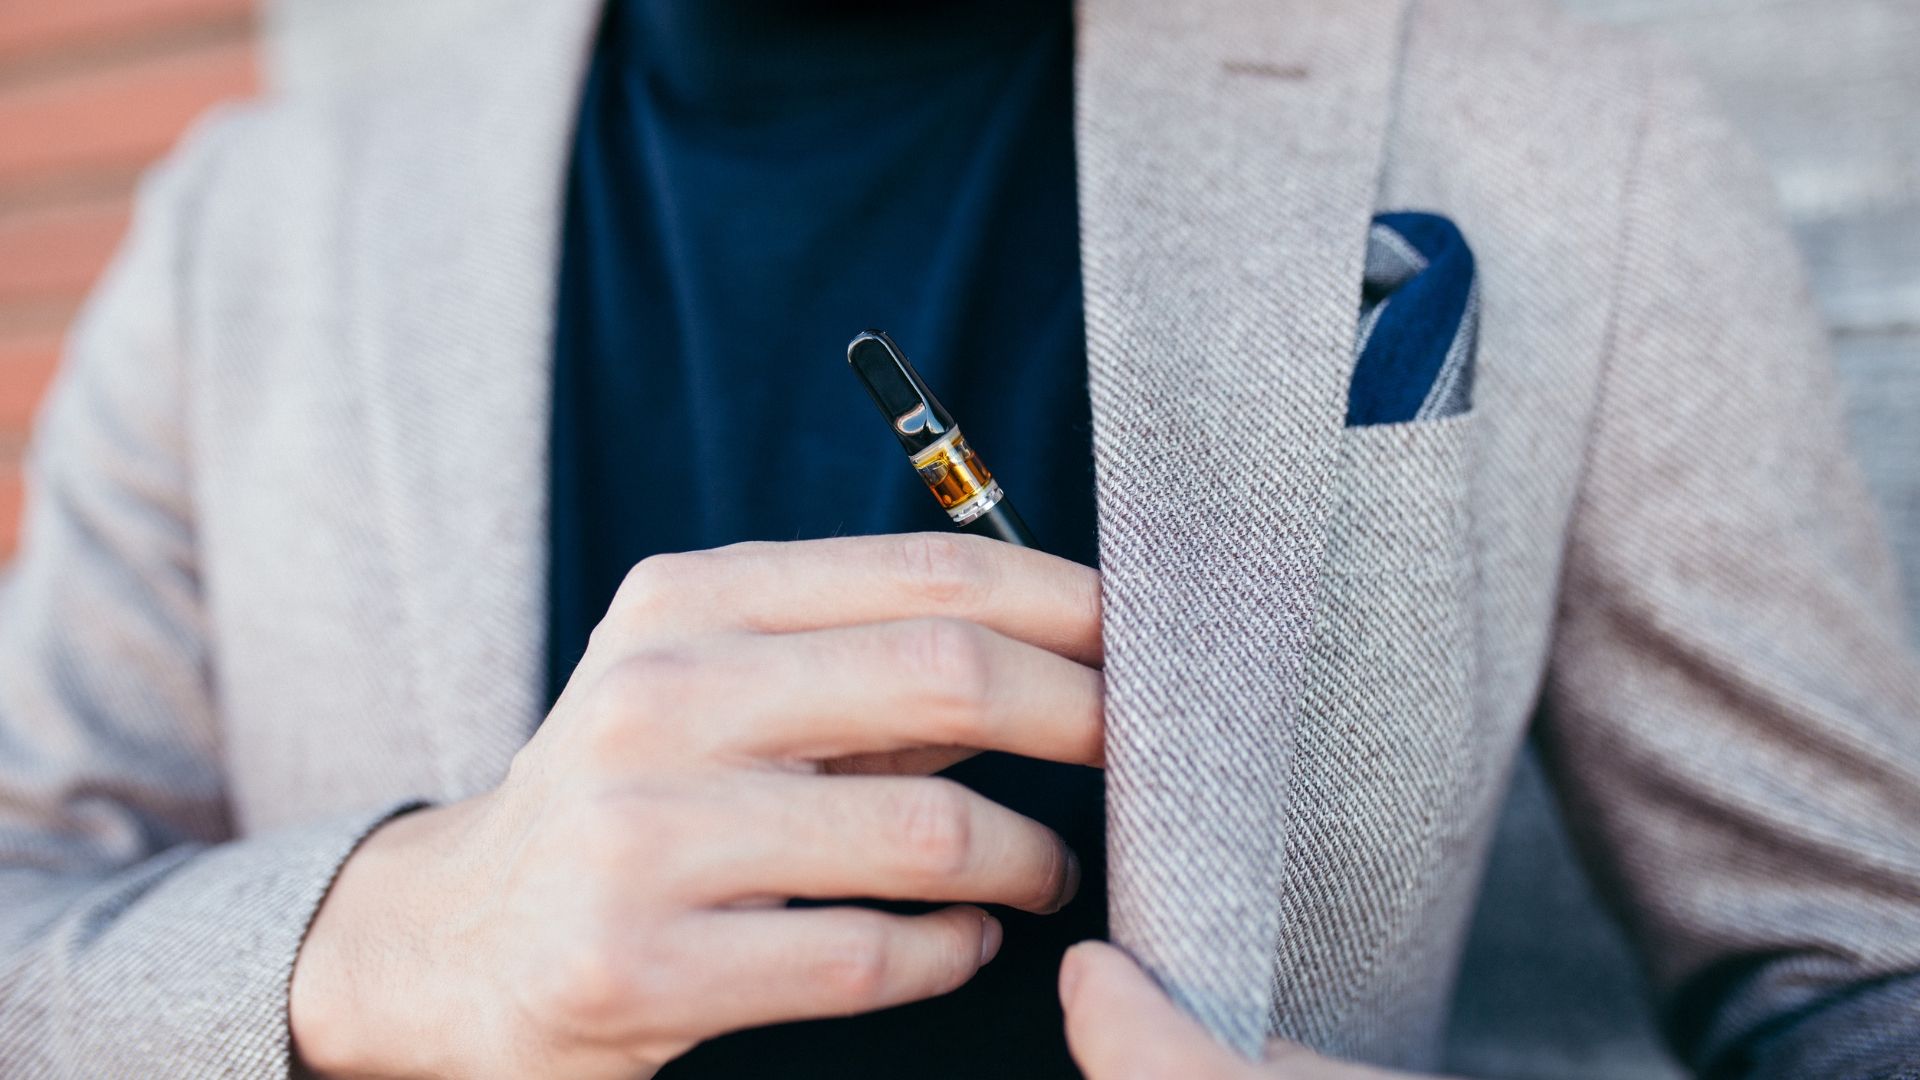 Vaping: The Future of Cannabis